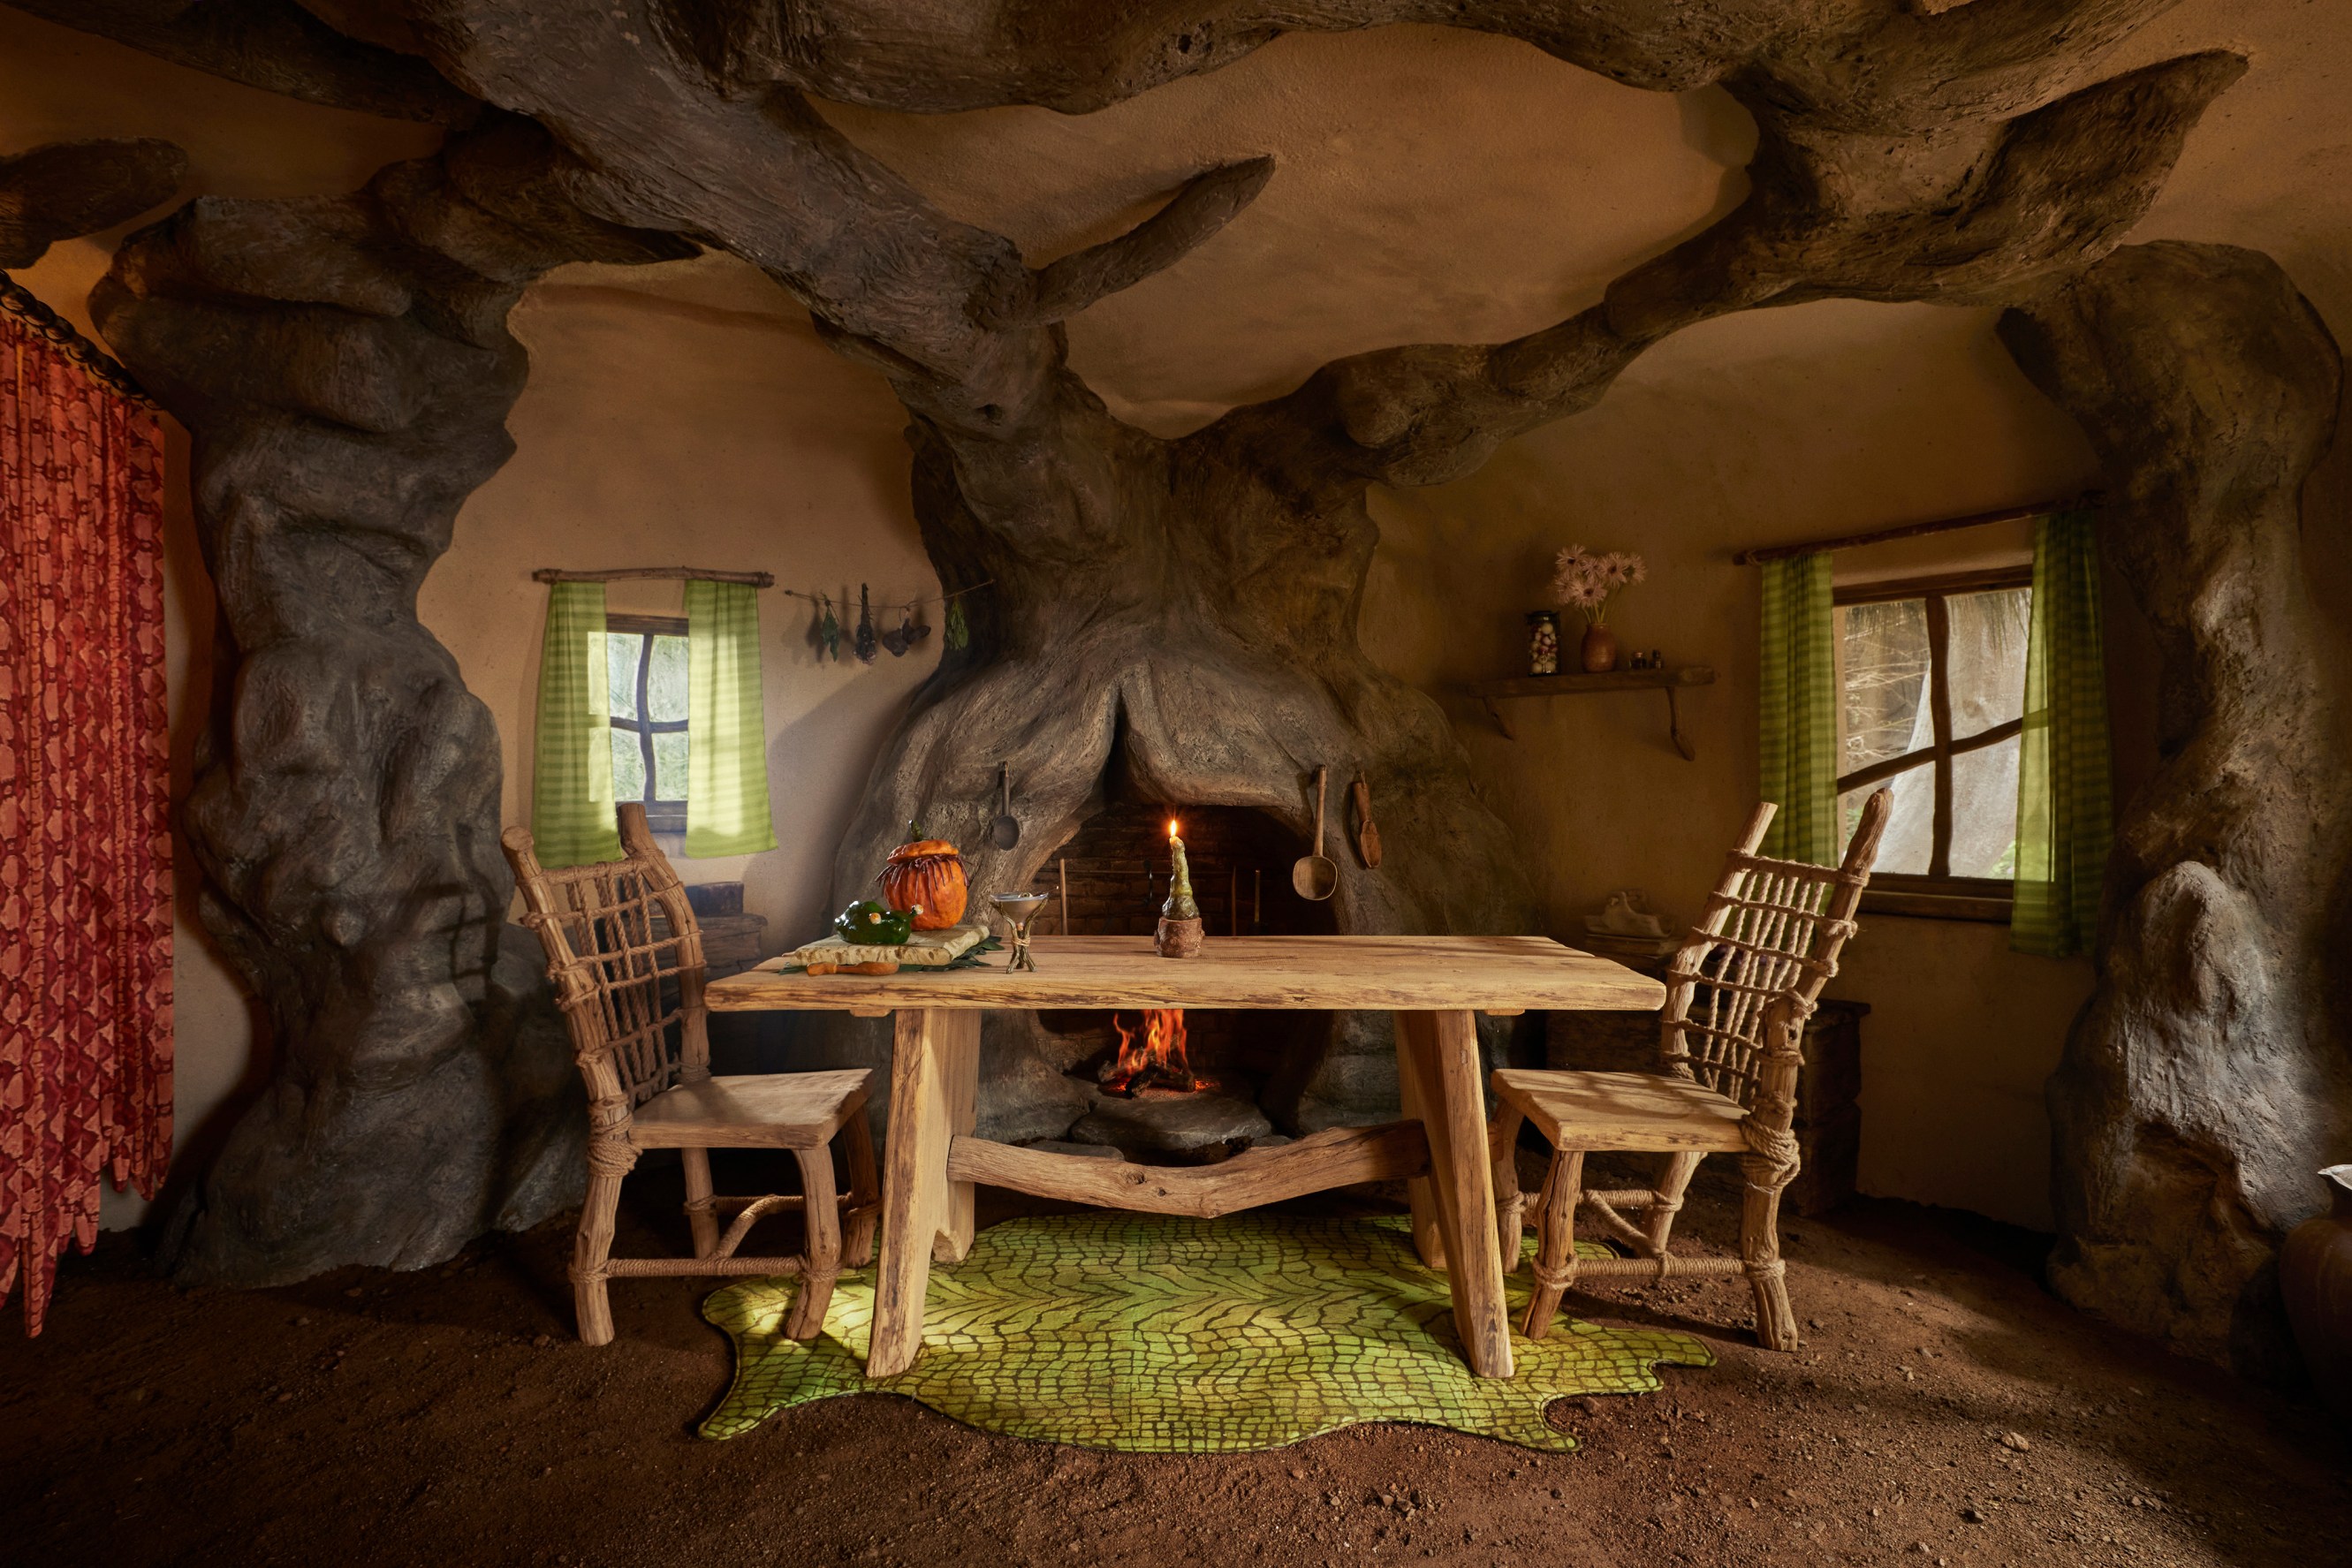 Dining table with two chairs in the kitchen of Shrek's Swamp